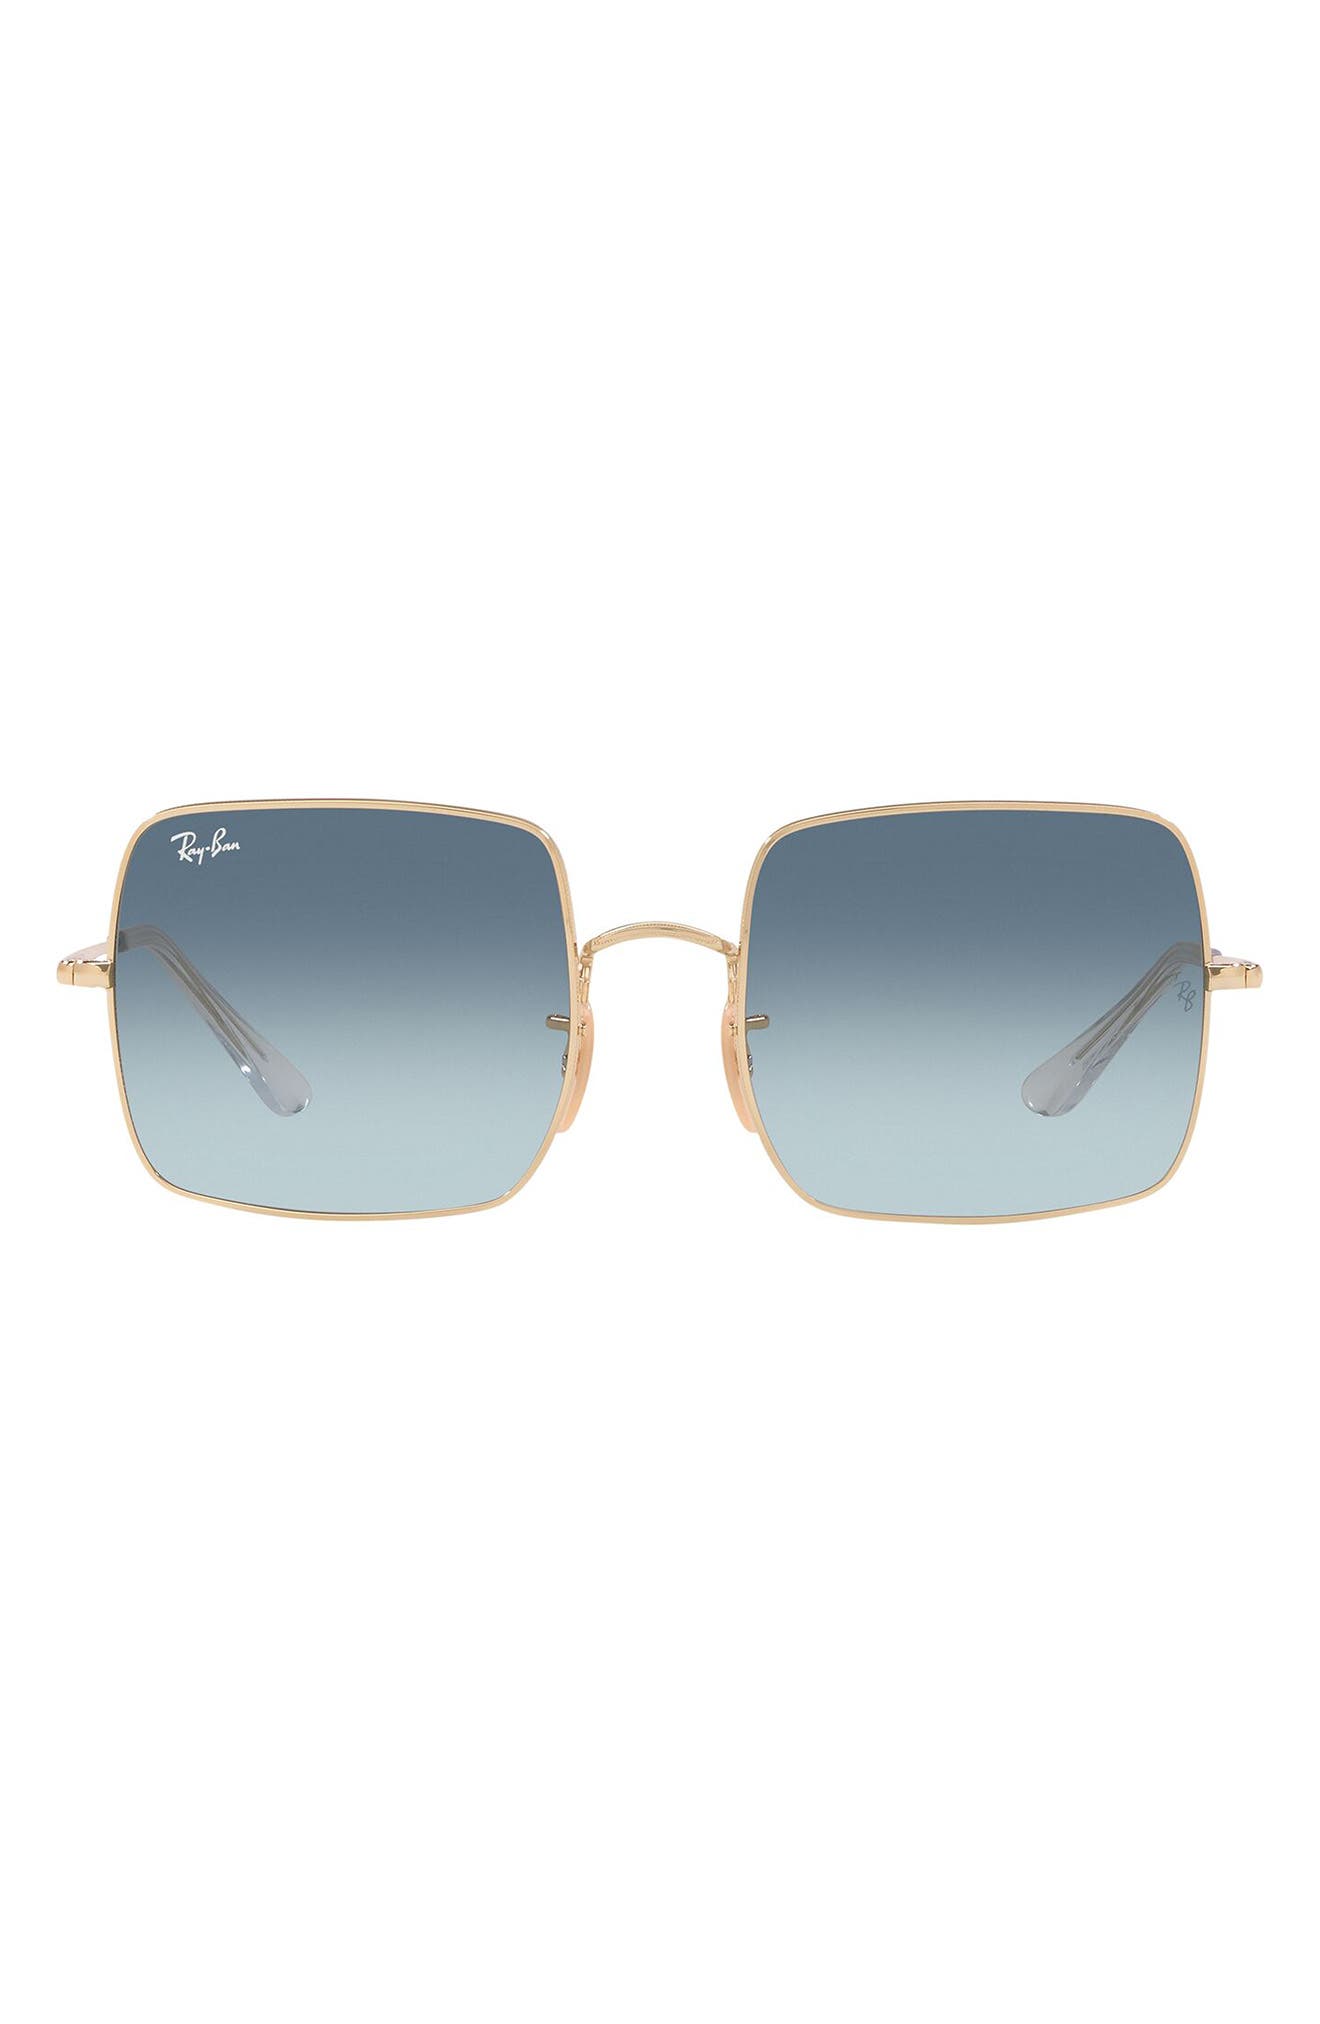 Ray Ban 54mm Square Sunglasses Nordstrom Rack